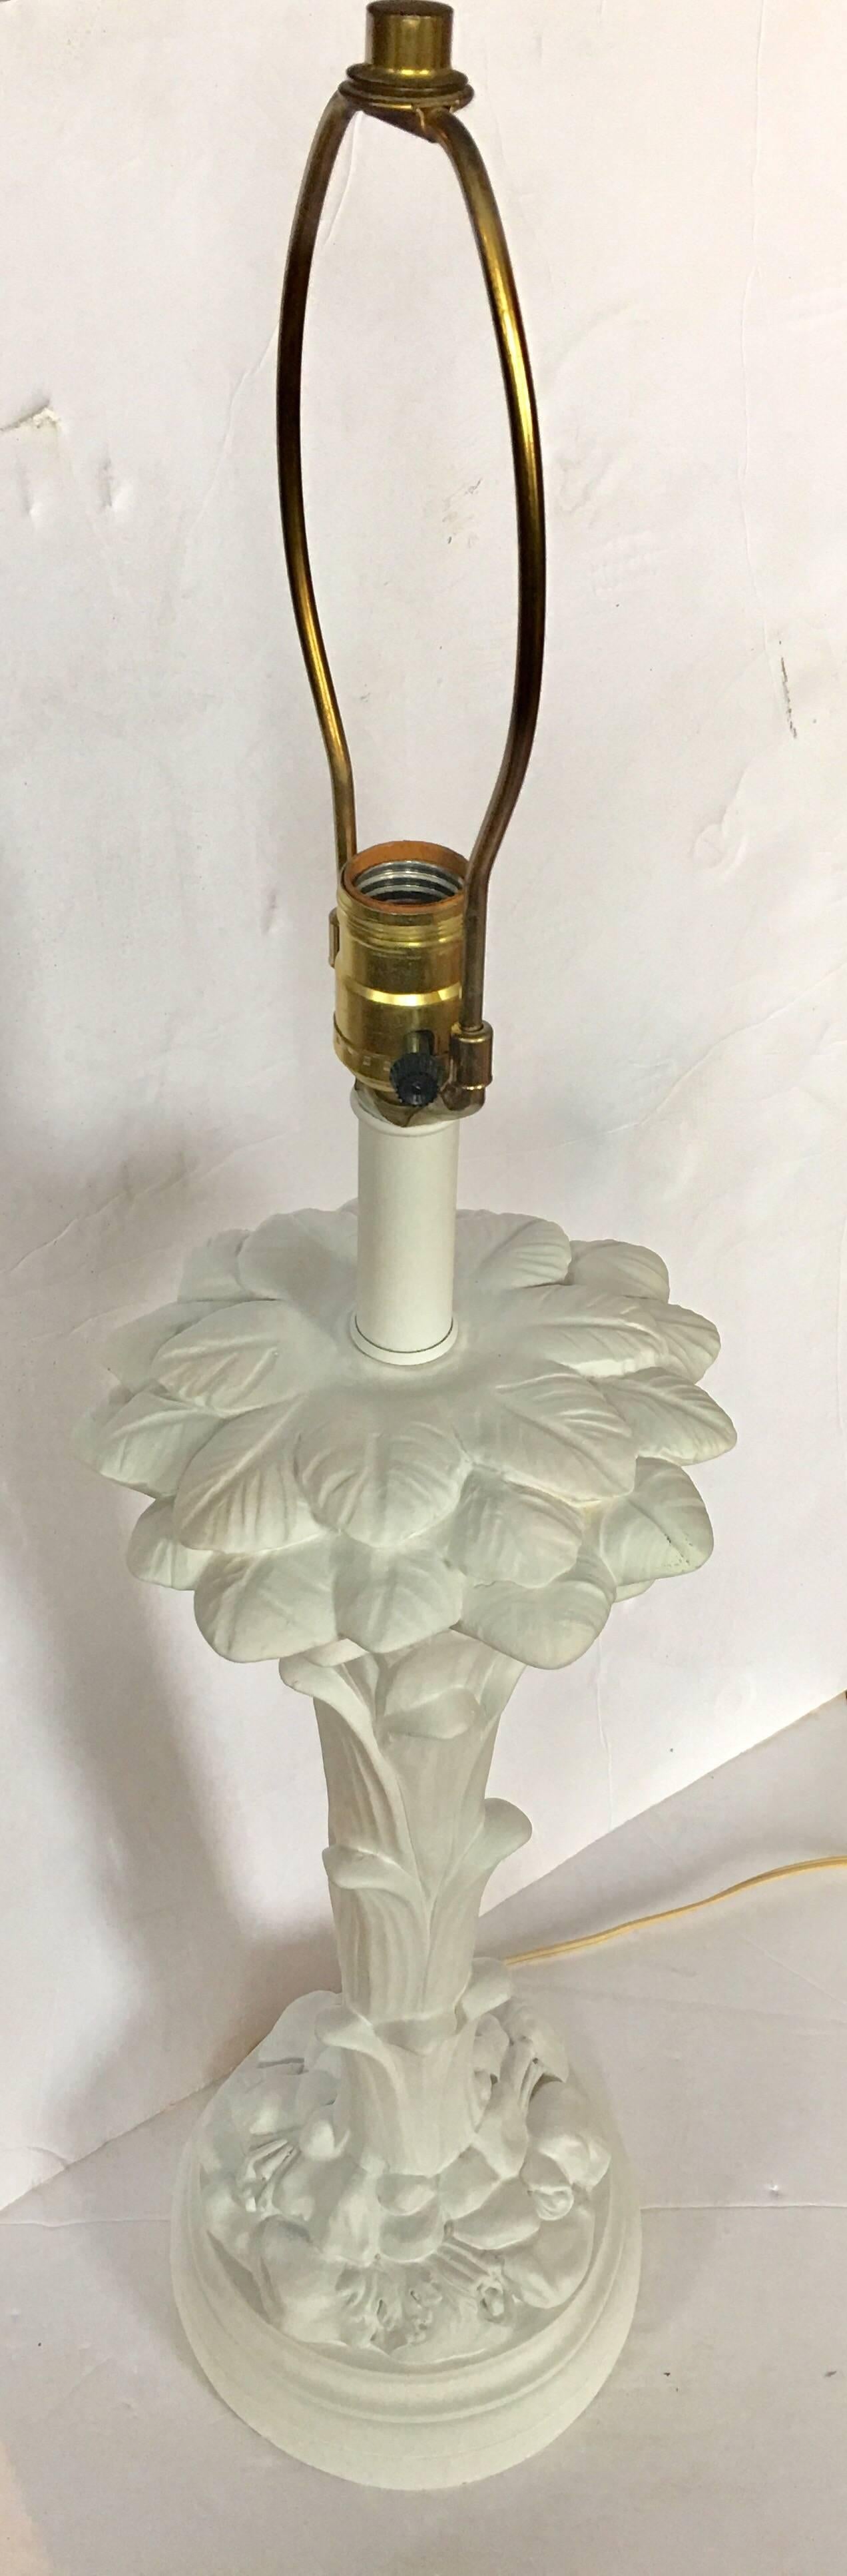 Midcentury Hollywood Regency style plaster palm tree form table lamp in the style of Serge Roche. Painted white matte finish. Original wiring in working condition. Lamp shade not included.

Measures: 24.5 inches high to socket.
31 inches high to